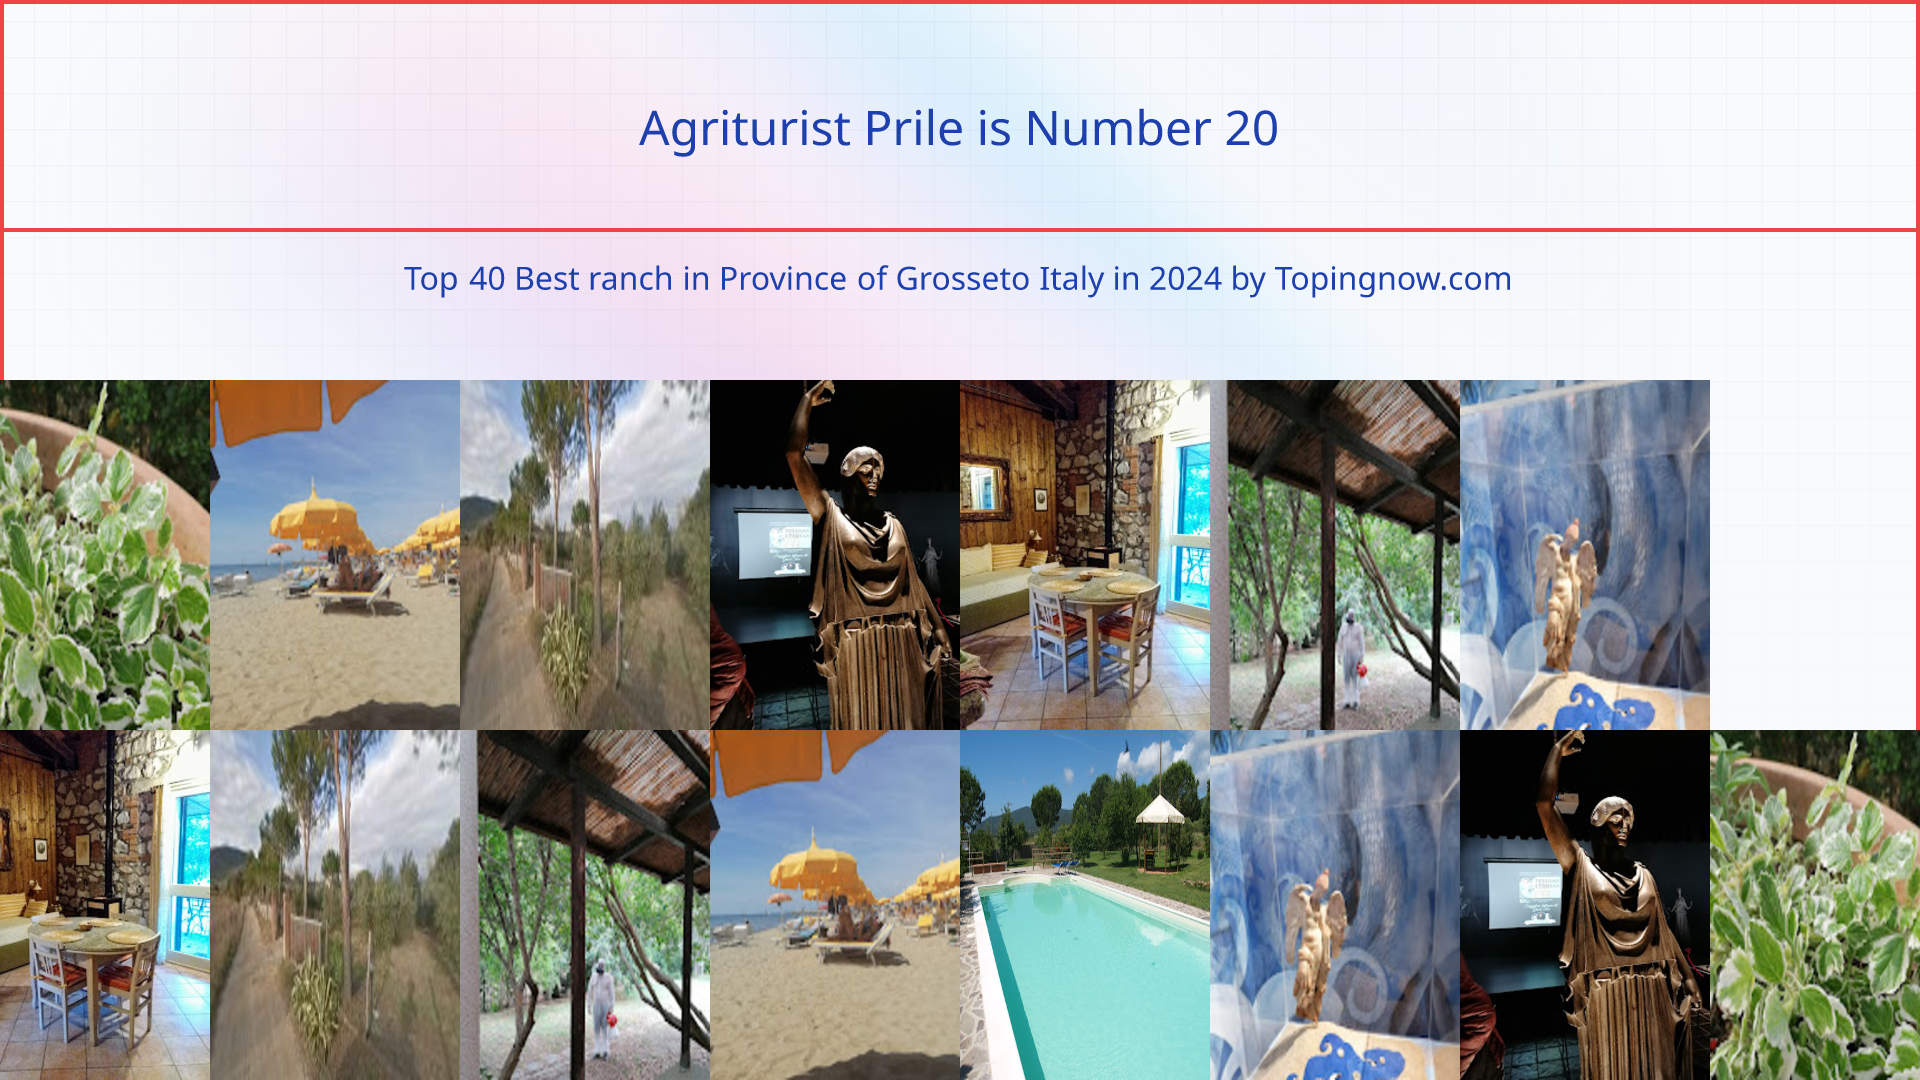 Agriturist Prile: Top 40 Best ranch in Province of Grosseto Italy in 2024